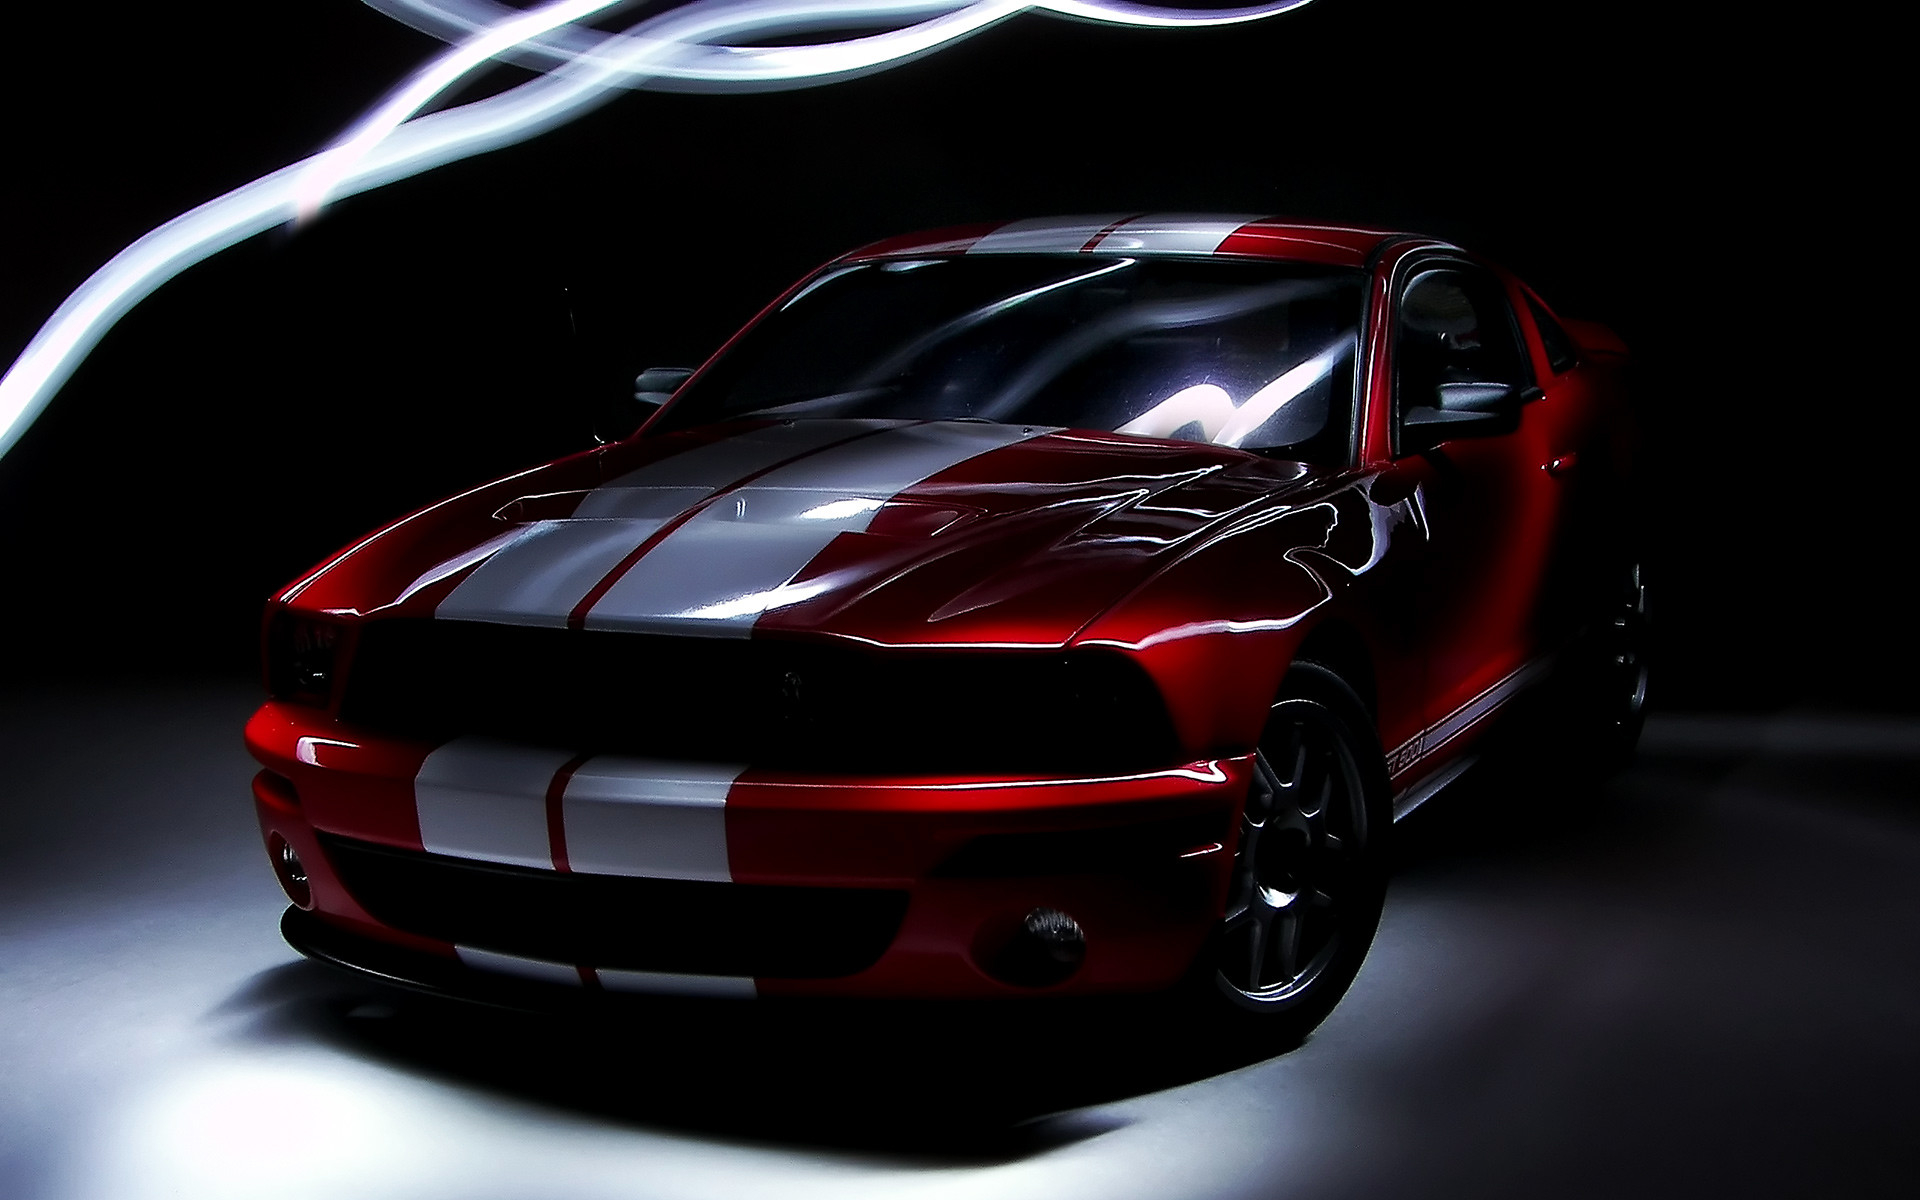 1920x1200 Cool Ford Cars Wallpapers HD - http://whatstrendingonline.com/cool-